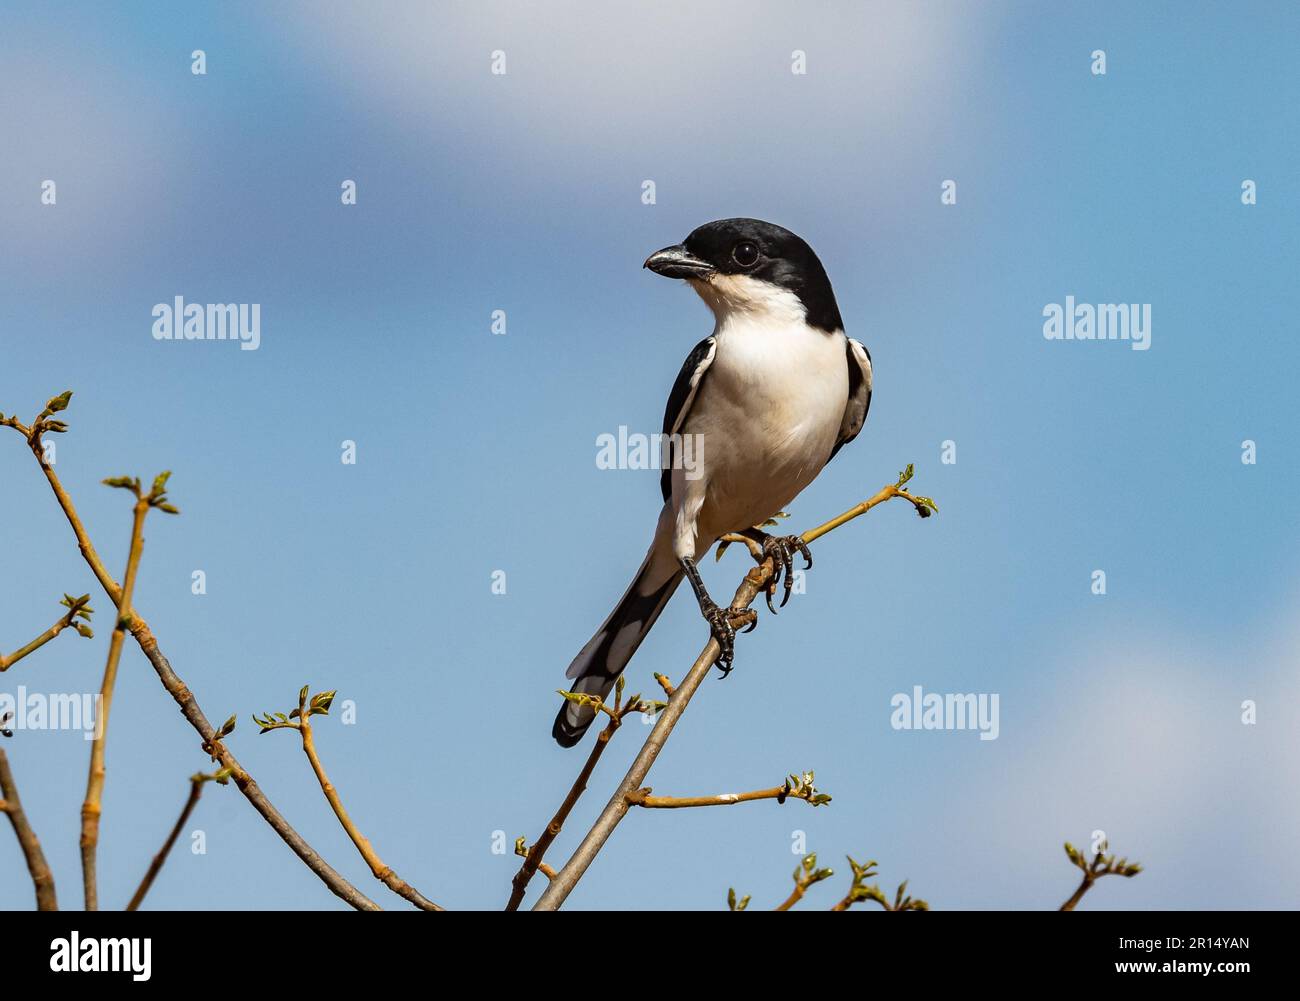 A Taita Fiscal (Lanius dorsalis) perched on a branch. Kenya, Africa. Stock Photo